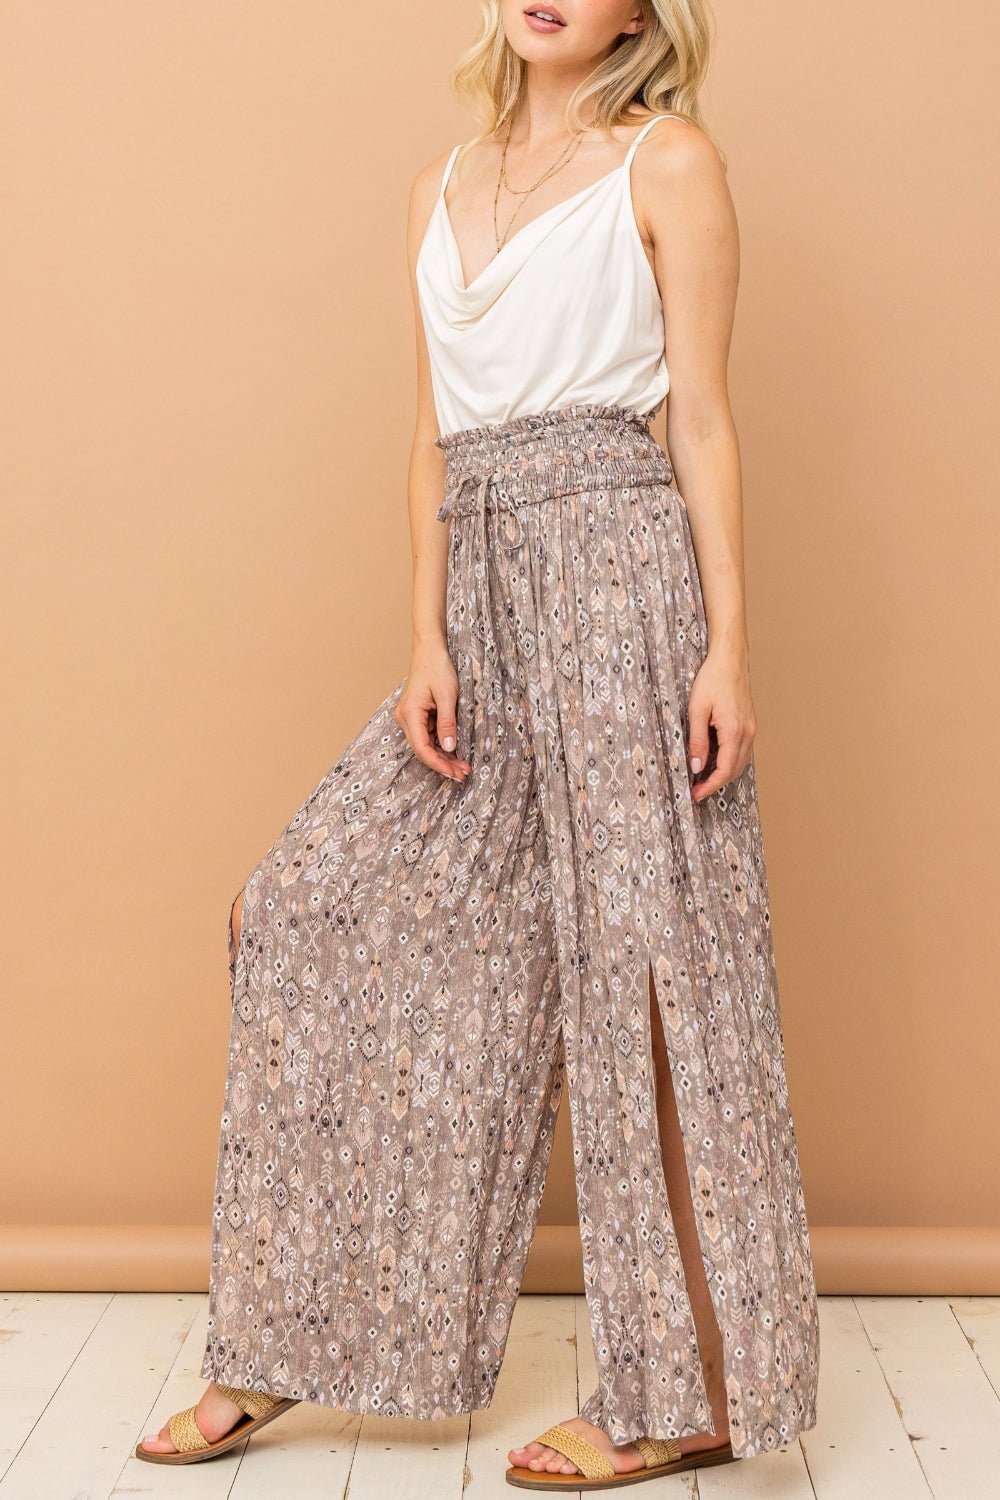 Printed Smocked Waist Wide Leg Pants in GreyPantsAnd the Why